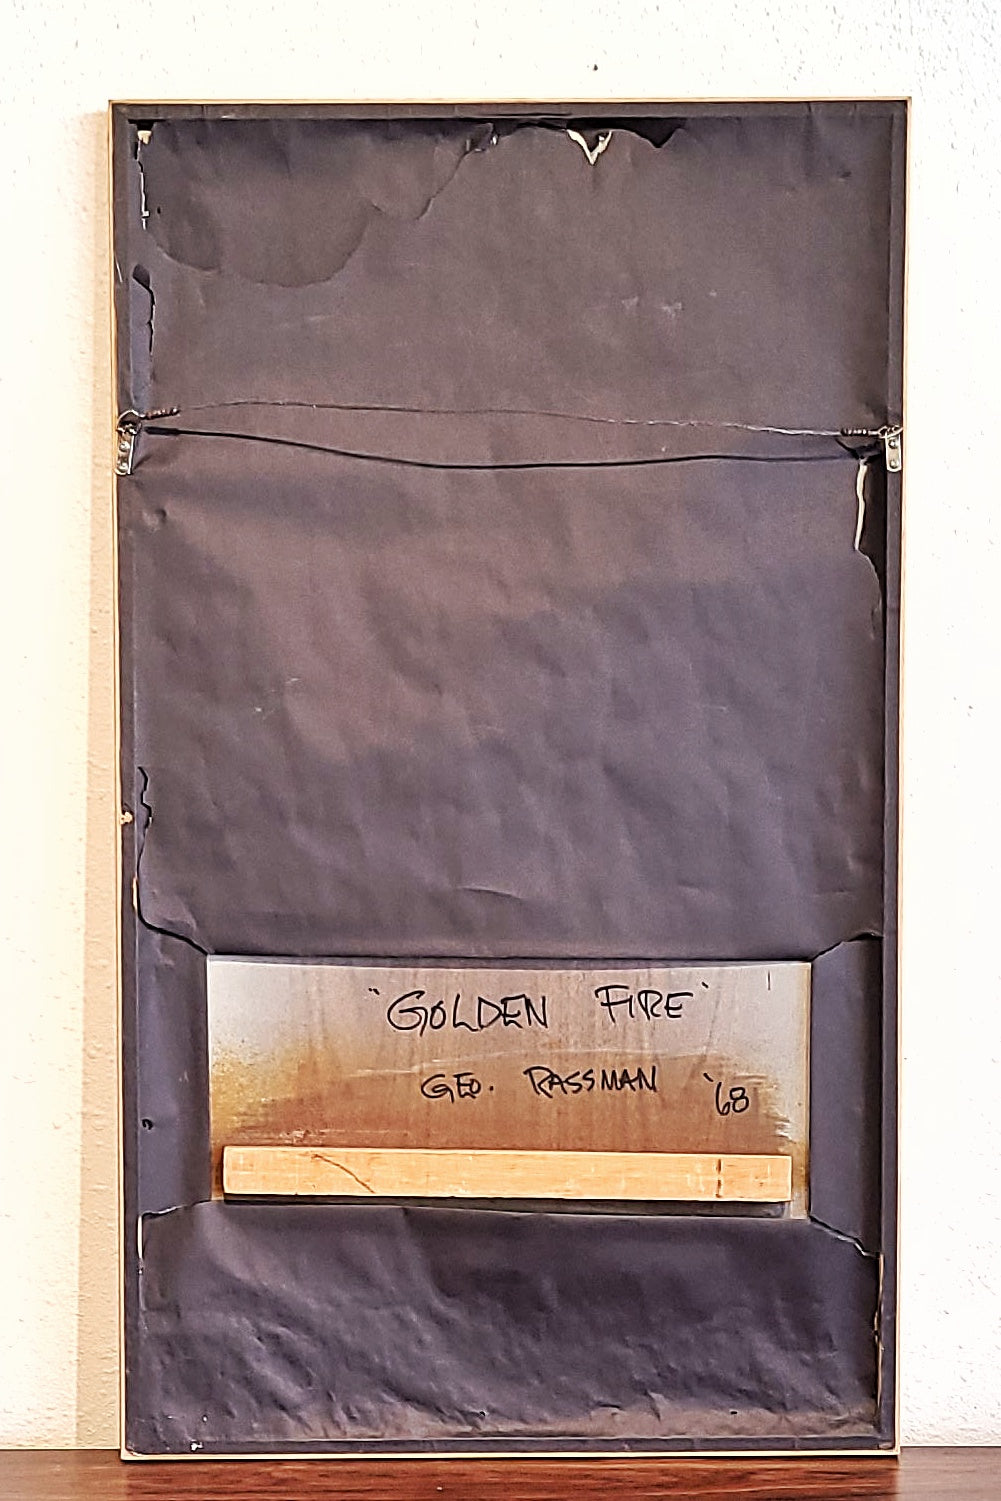 ‘GOLDEN FIRE’ POLYMER ON PANEL BY GEORGE RASSMAN (1968)